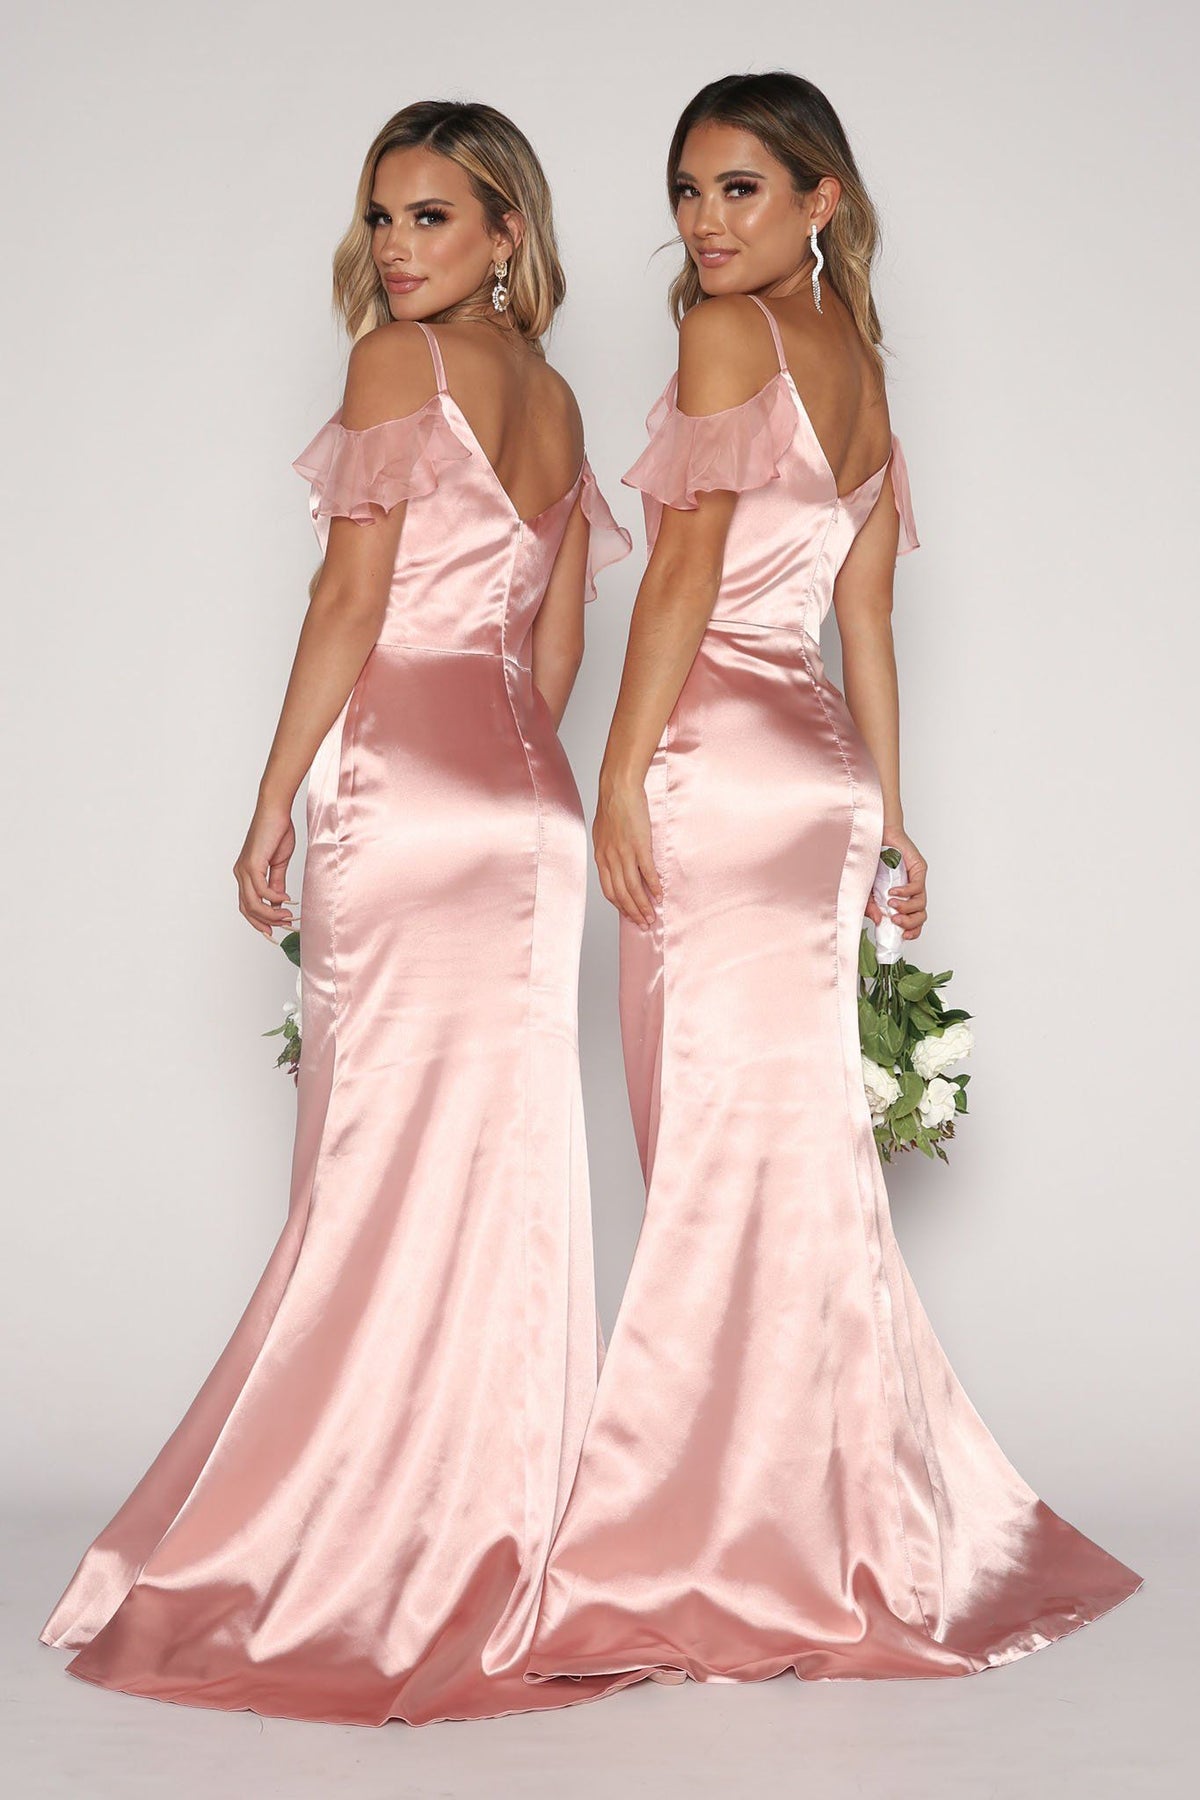 Light Pink Satin Floor Length Maxi Bridesmaids Dress with V-neckline, Cascading Ruffle Sleeve Detail, Thin Shoulder Straps, Open Back and Fit and Flare Silhouette